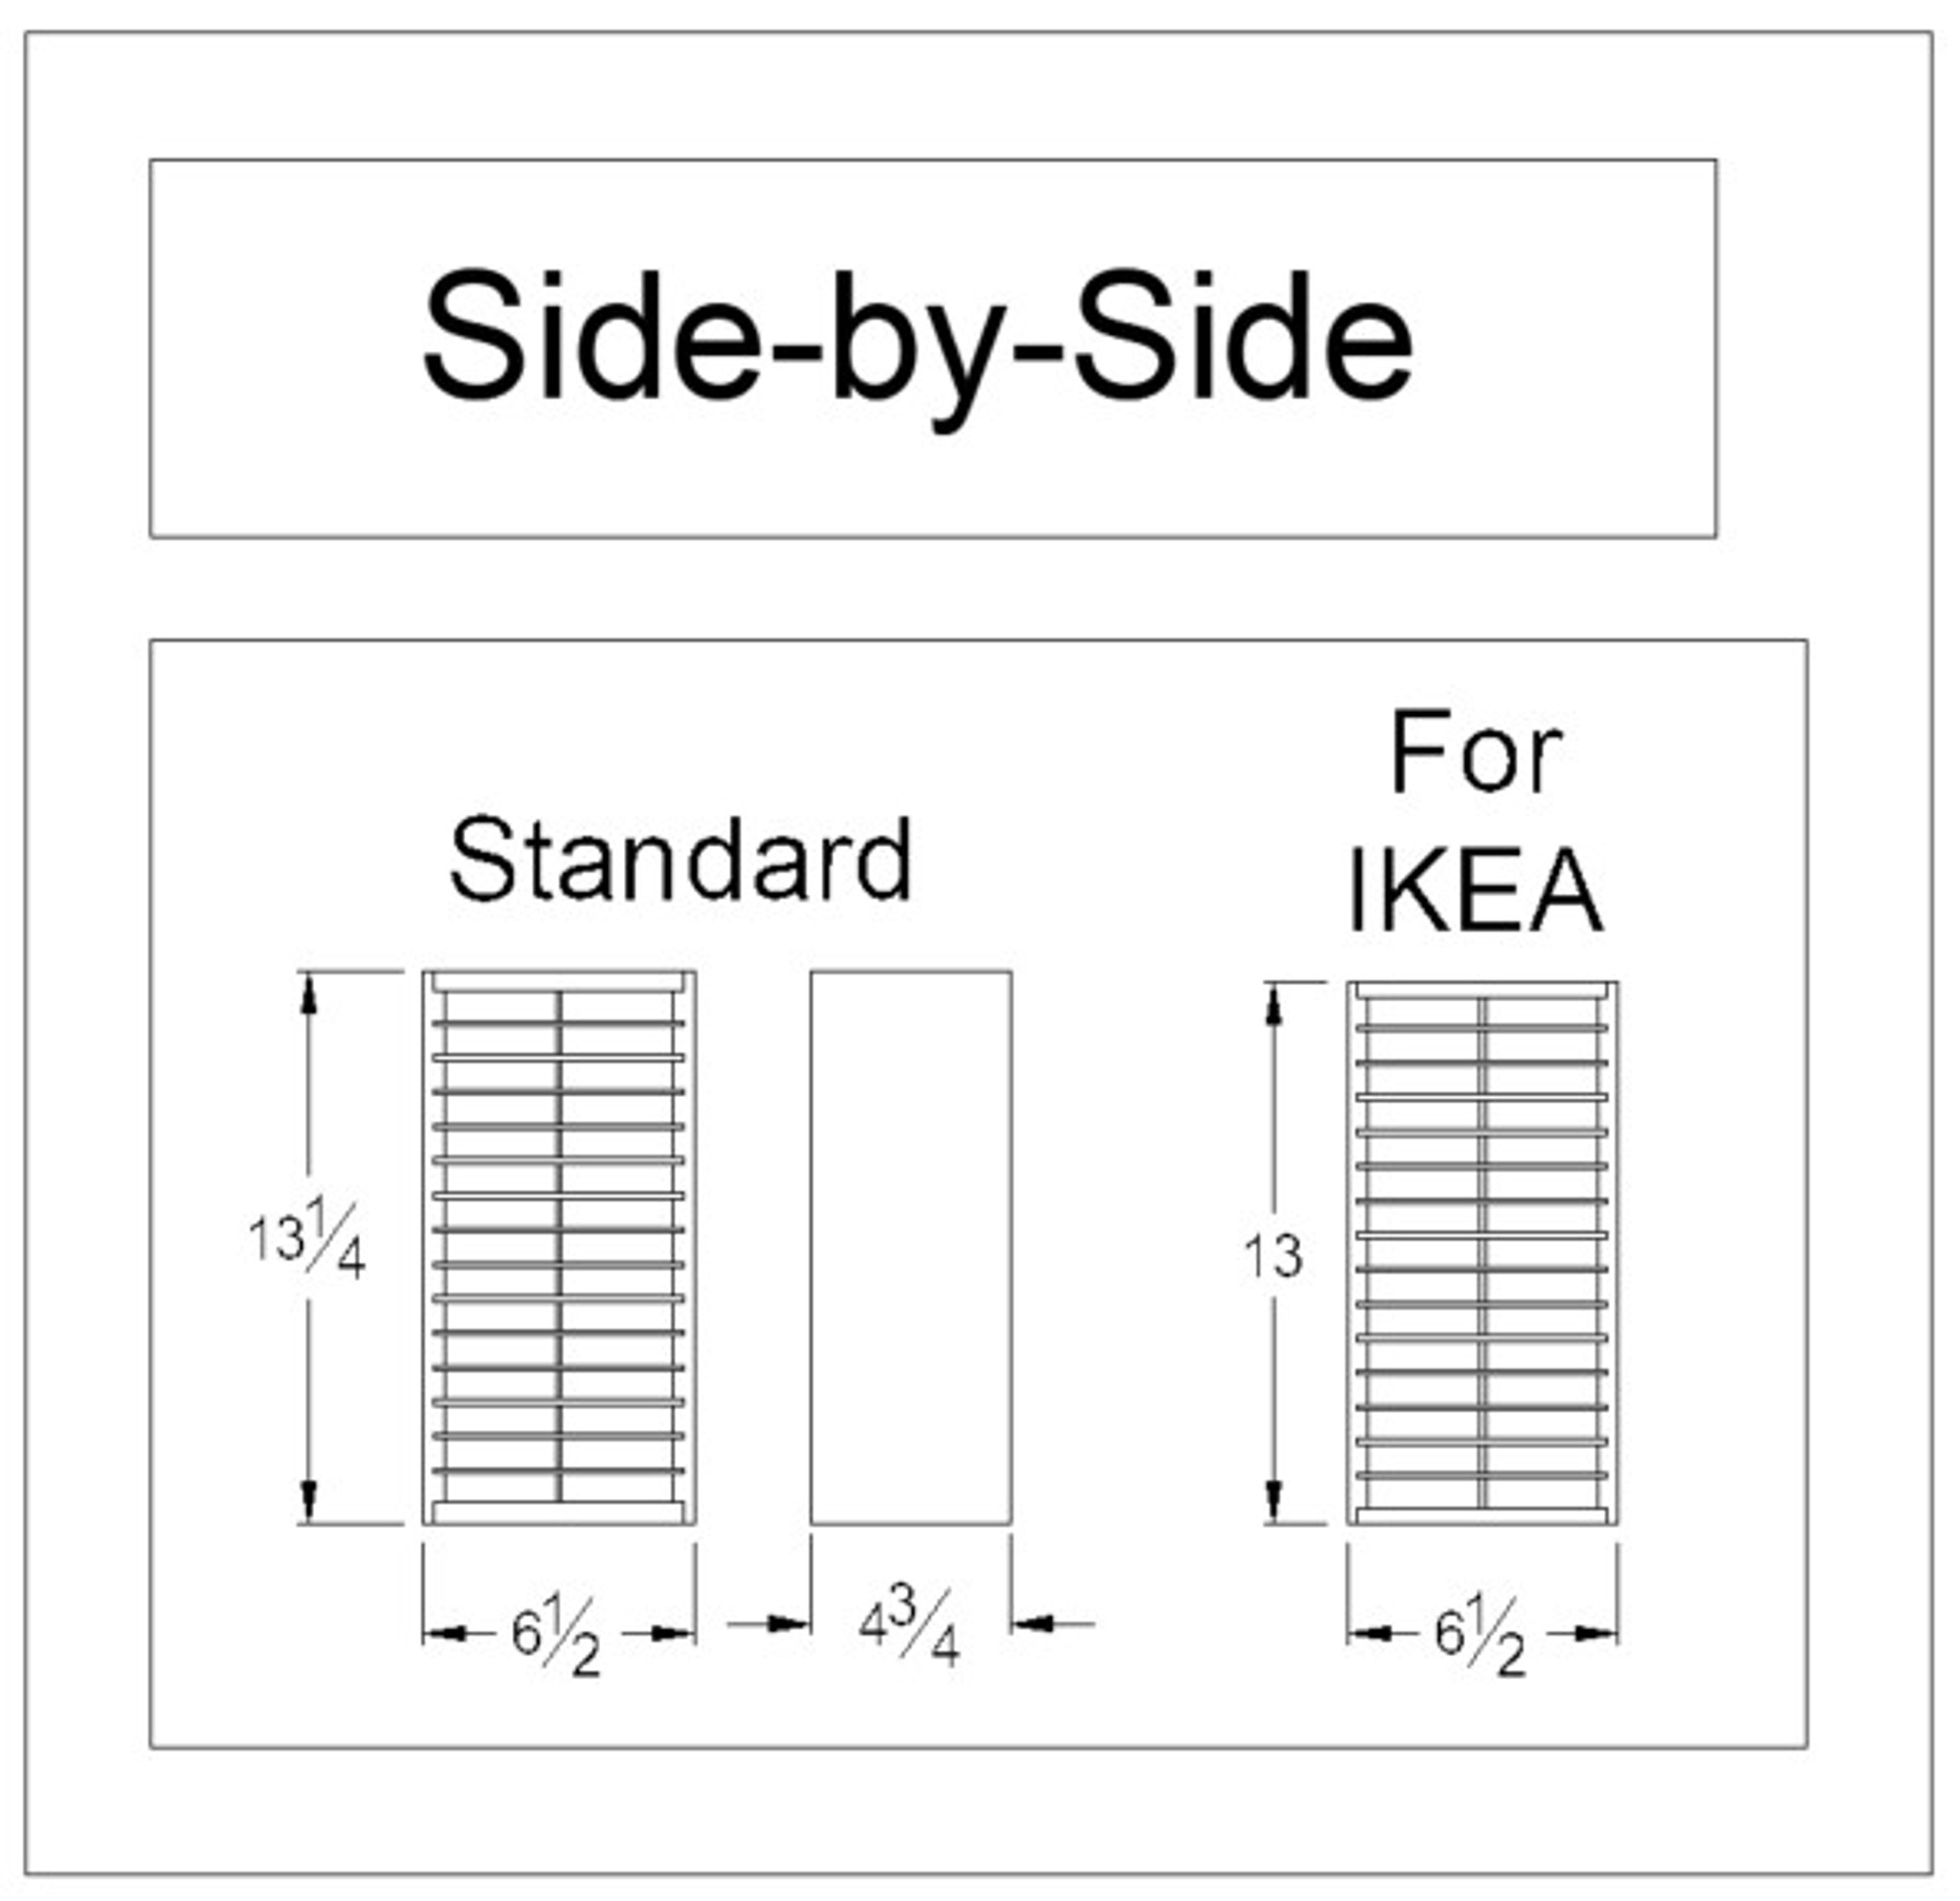  Stamp-n-Storage Marker Holder - Side-by-Side for IKEA (Will fit  IKEA Kallax Shelving)